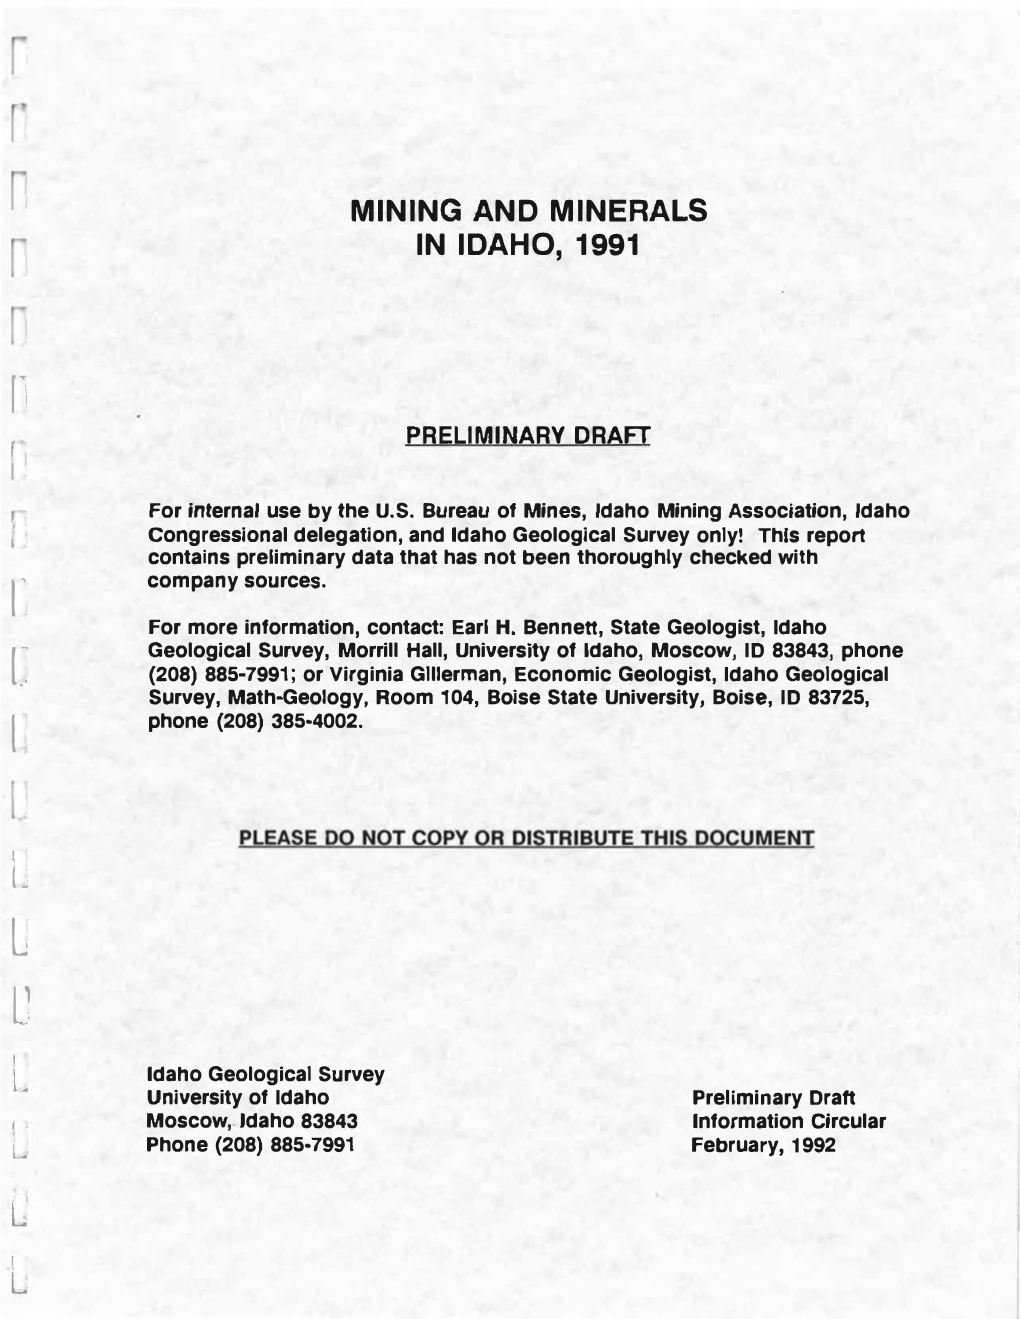 Mining and Minerals in Idaho, 1991